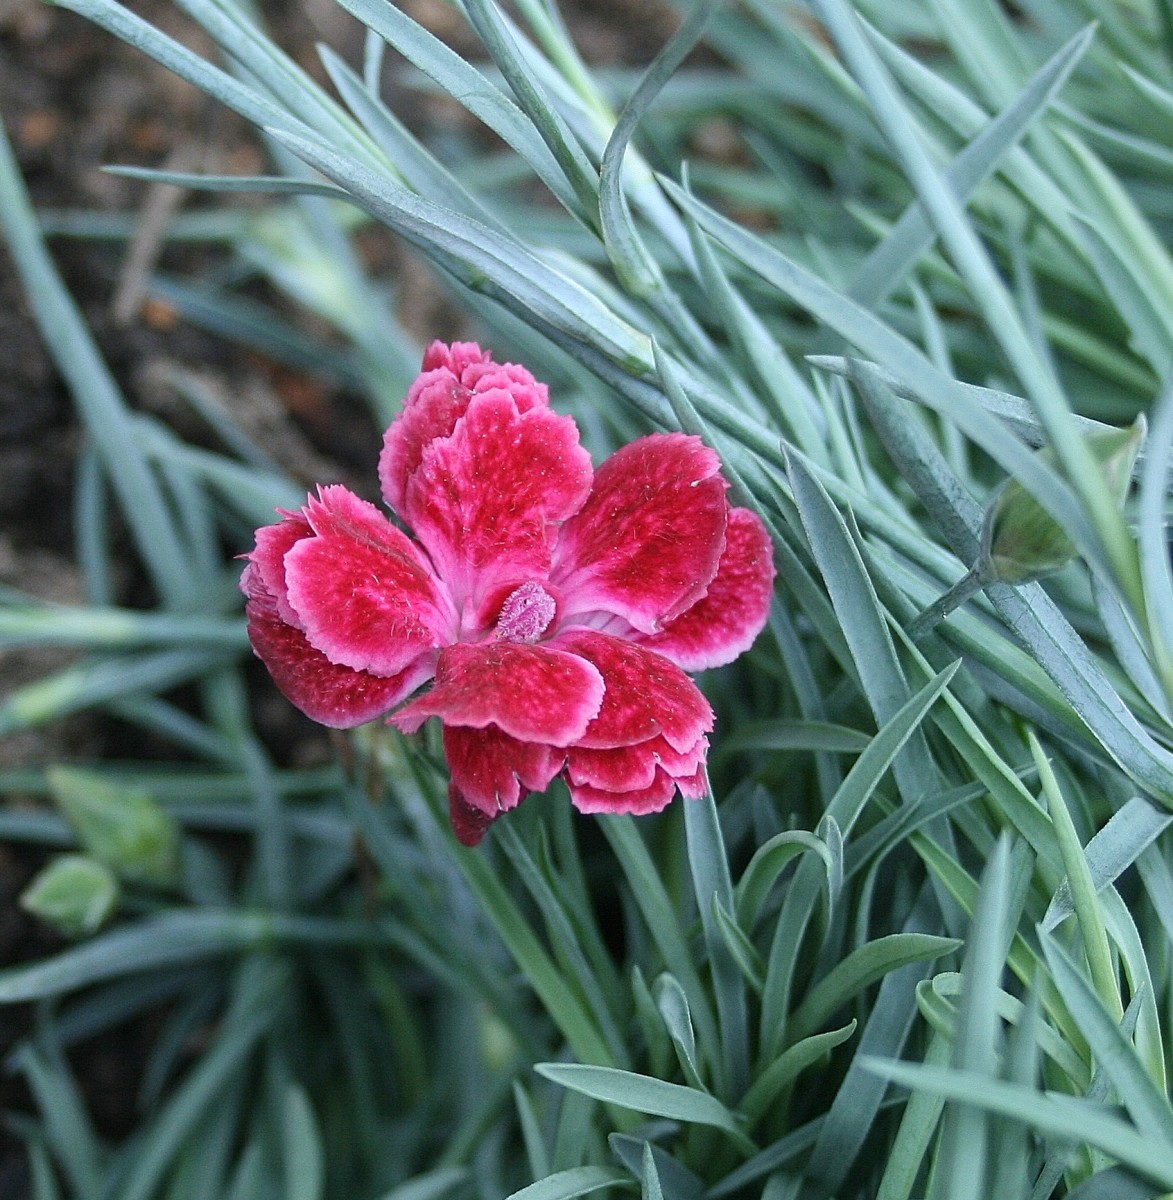 Several dianthus hybrids have silvery blue foliage. This one is called 'Rosish One.'